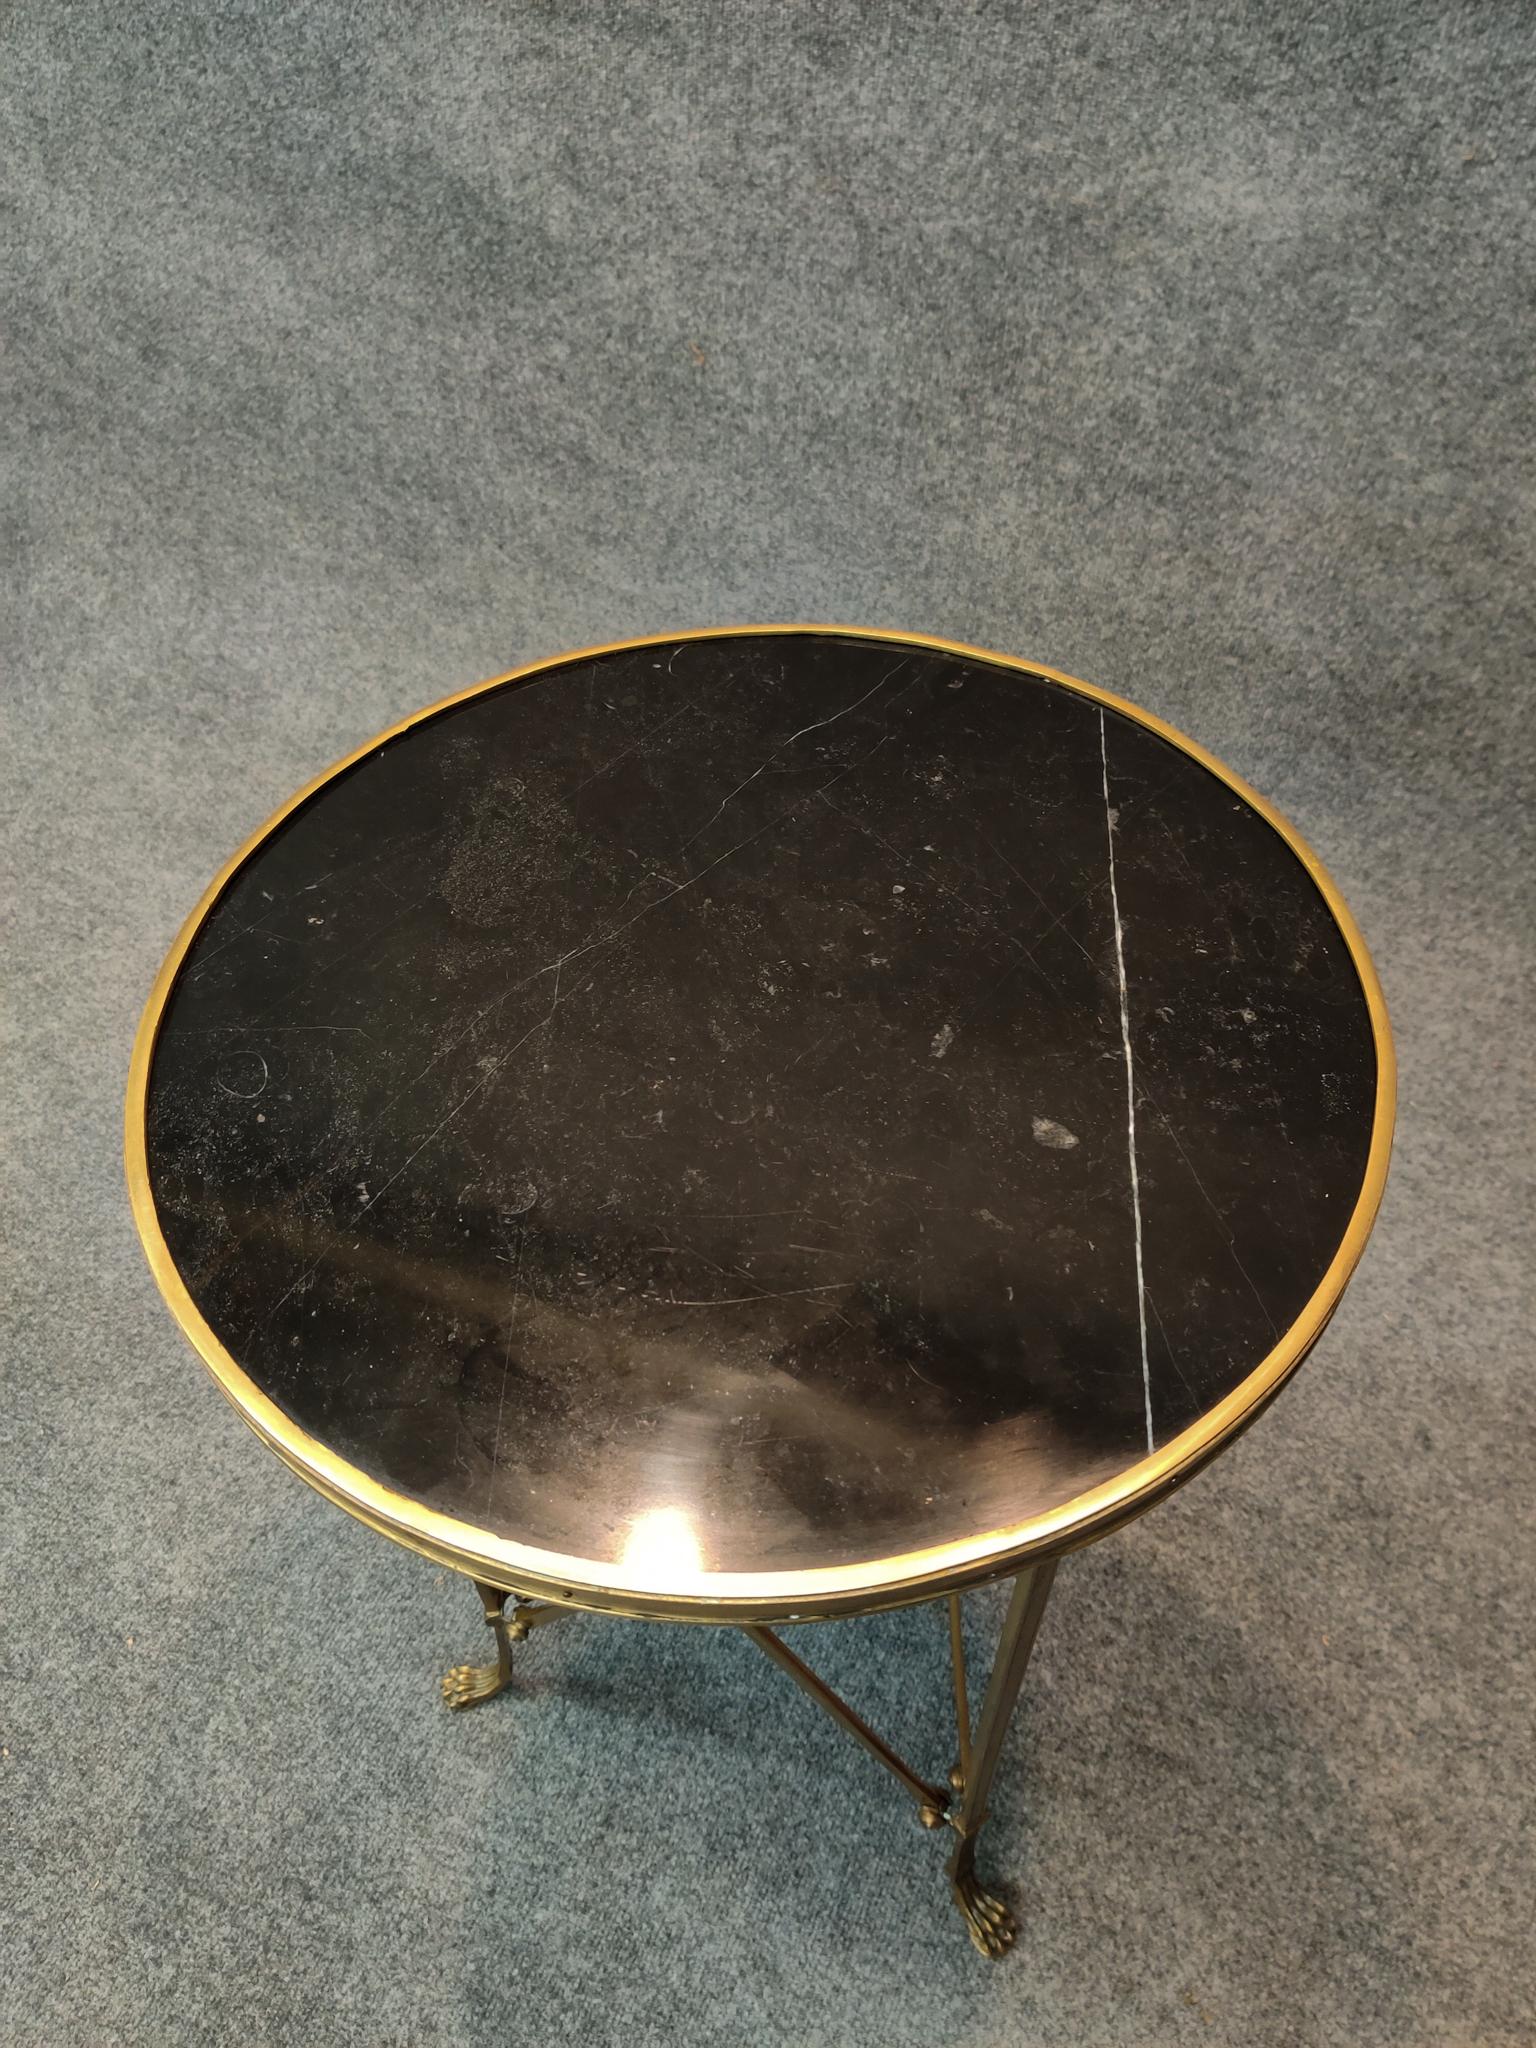 Subtle, yet grand in composure, our Directoire table recalls an earlier time in history.
This oh so French piece with its slim footprint is a fantastic little side table with ample surface space for your essentials. Brass legs and stretchers. Table